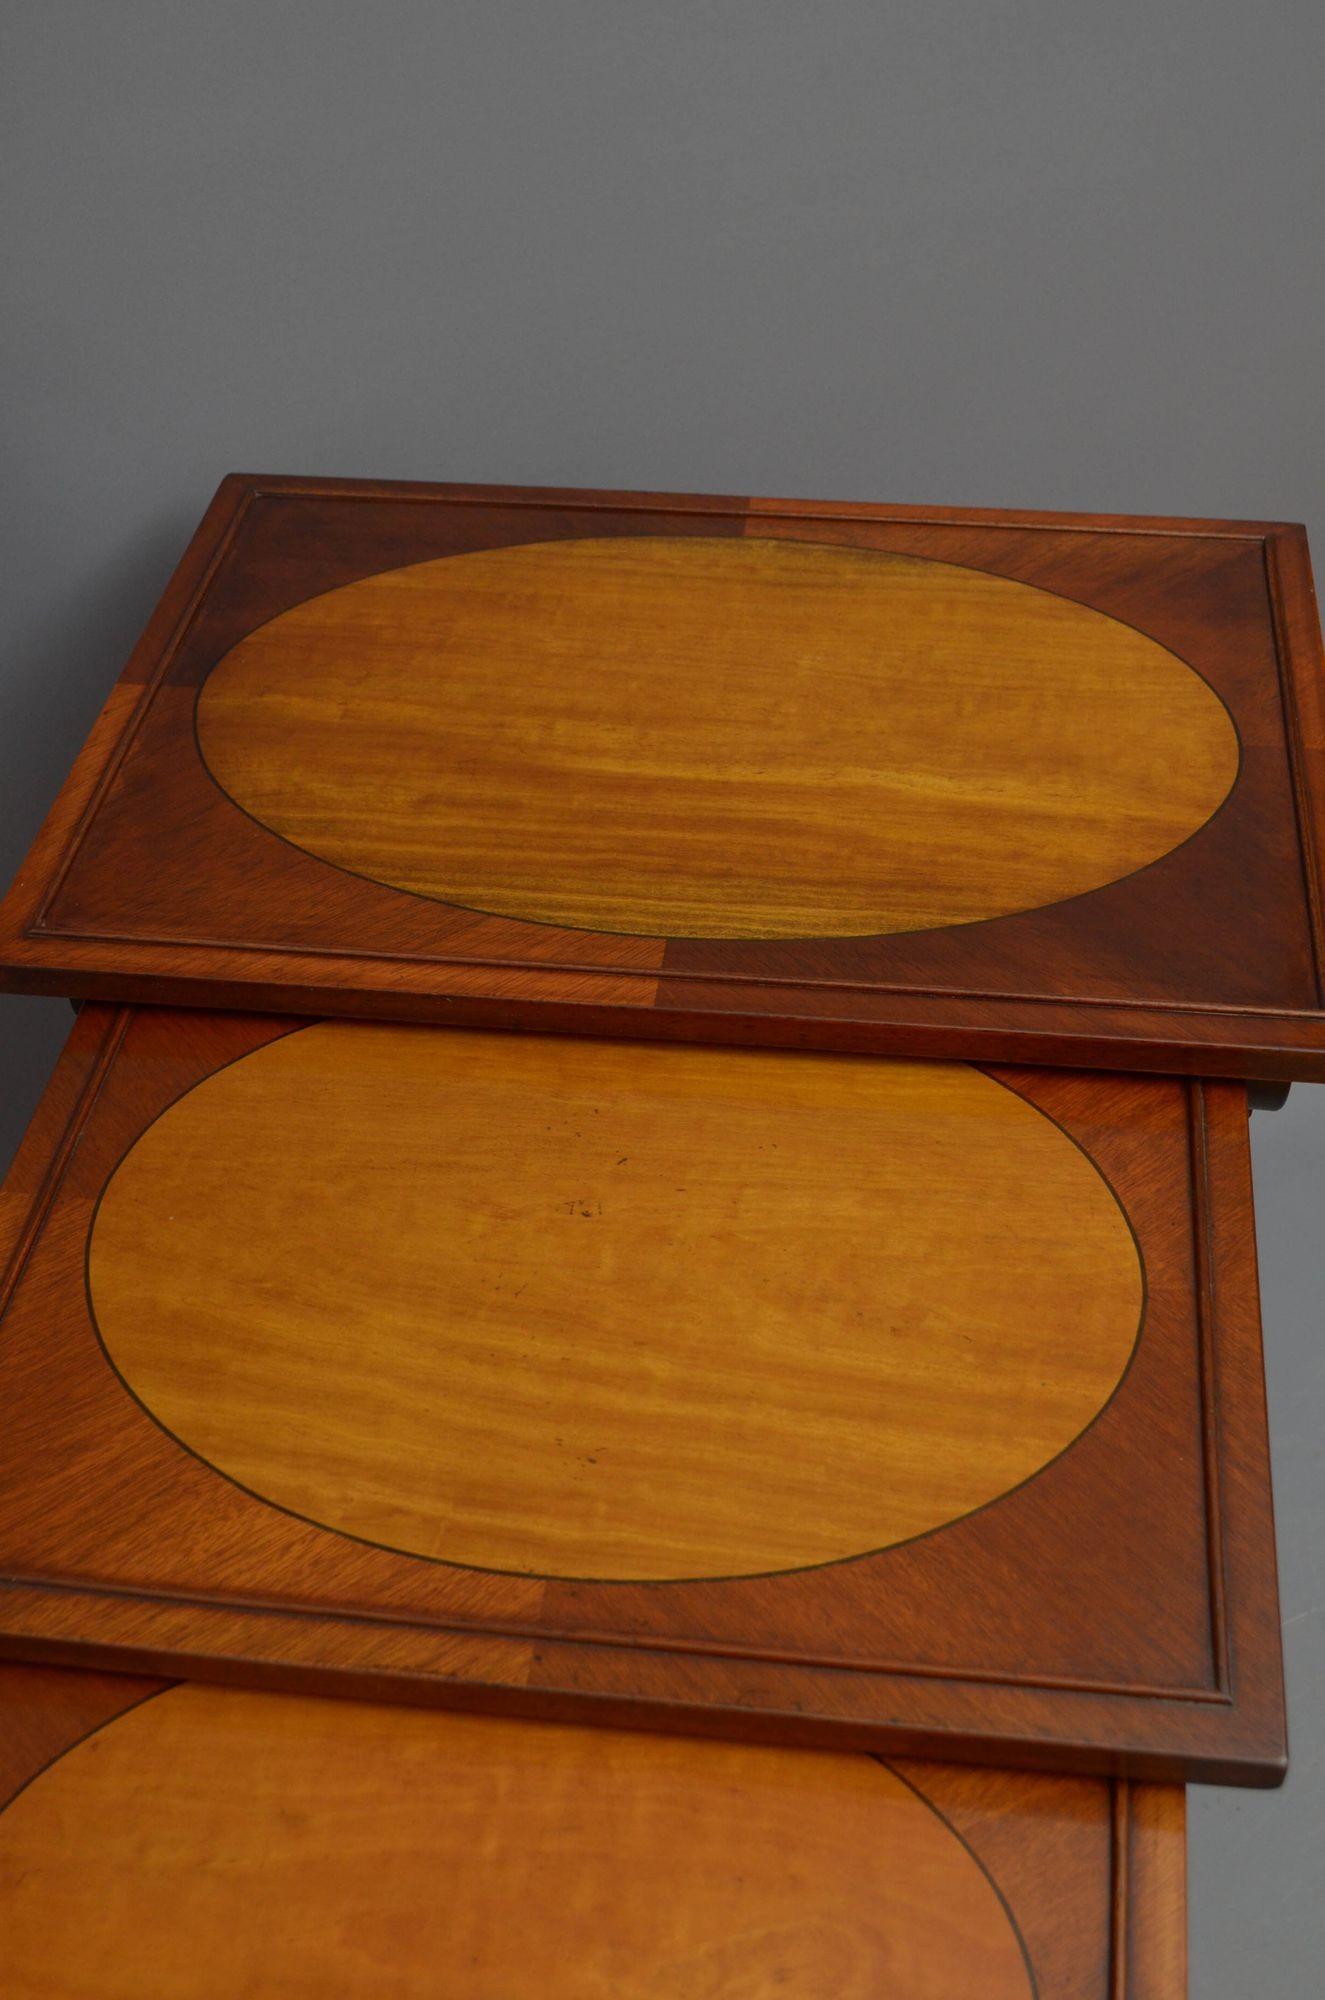 Edwardian Mahogany and Satinwood Nest of Tables In Good Condition For Sale In Whaley Bridge, GB